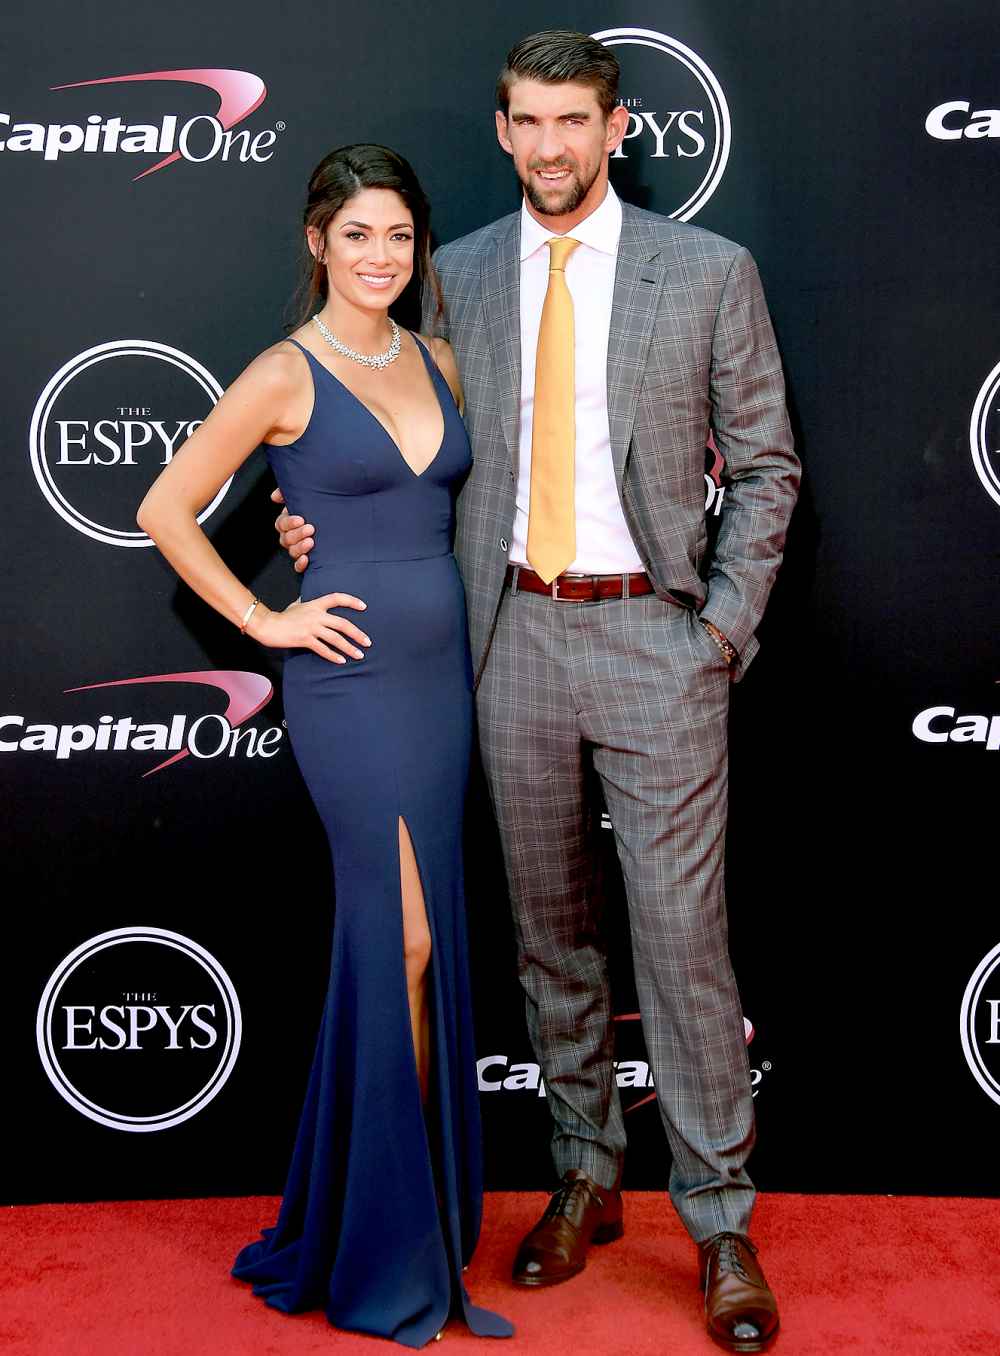 Michael Phelps (R) and Nicole Johnson attend The 2017 ESPYS at Microsoft Theater on July 12, 2017 in Los Angeles, California.